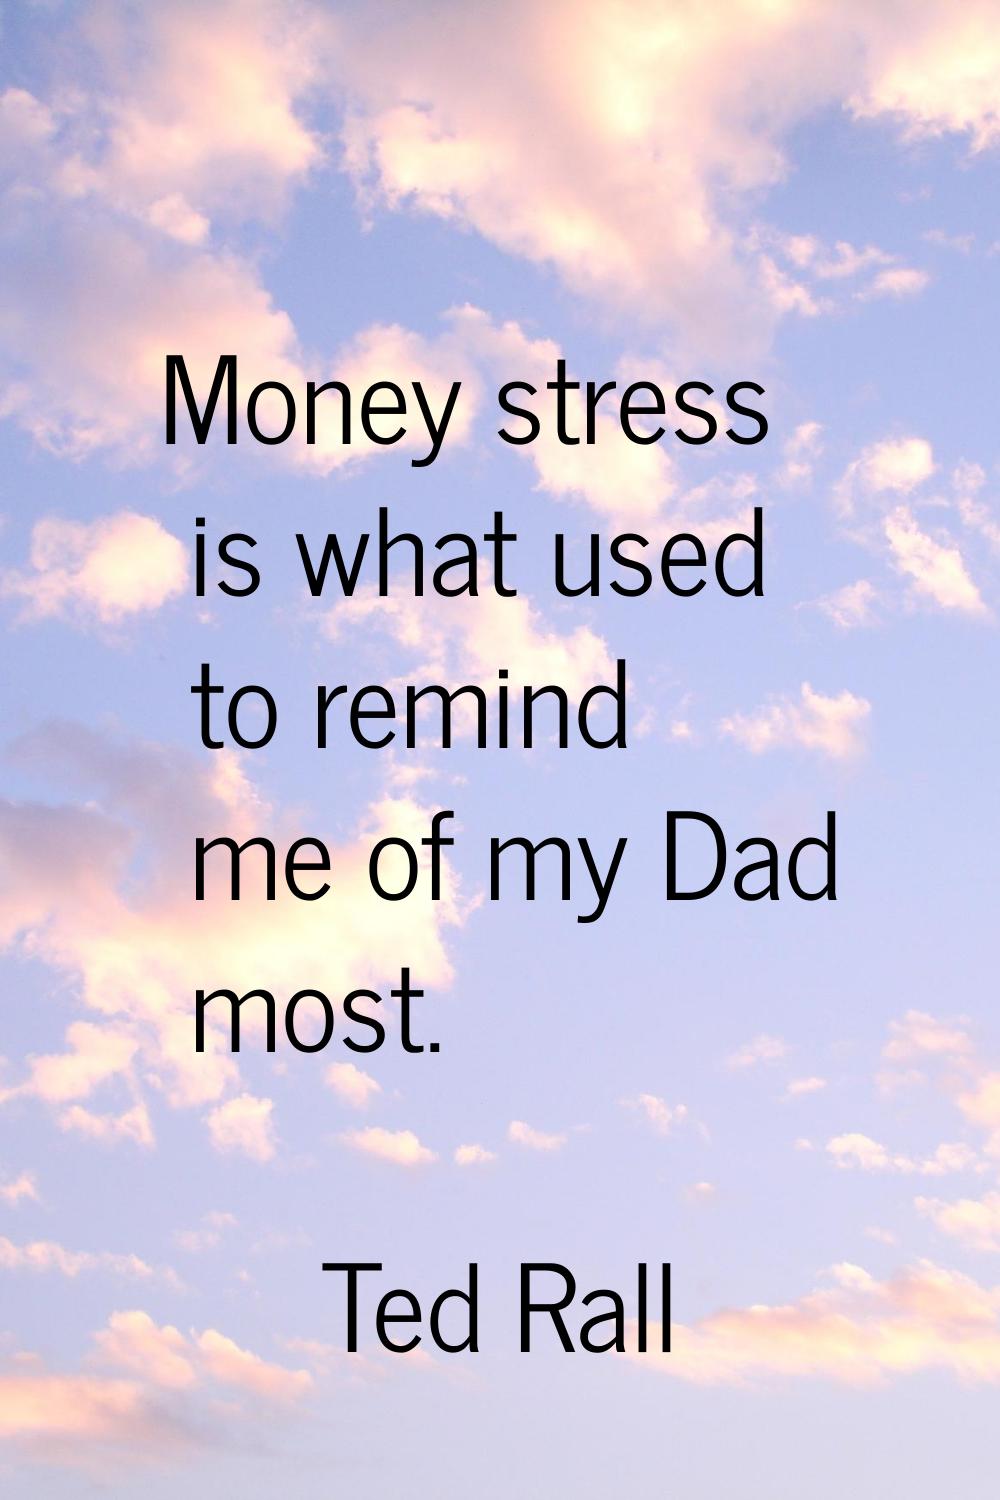 Money stress is what used to remind me of my Dad most.